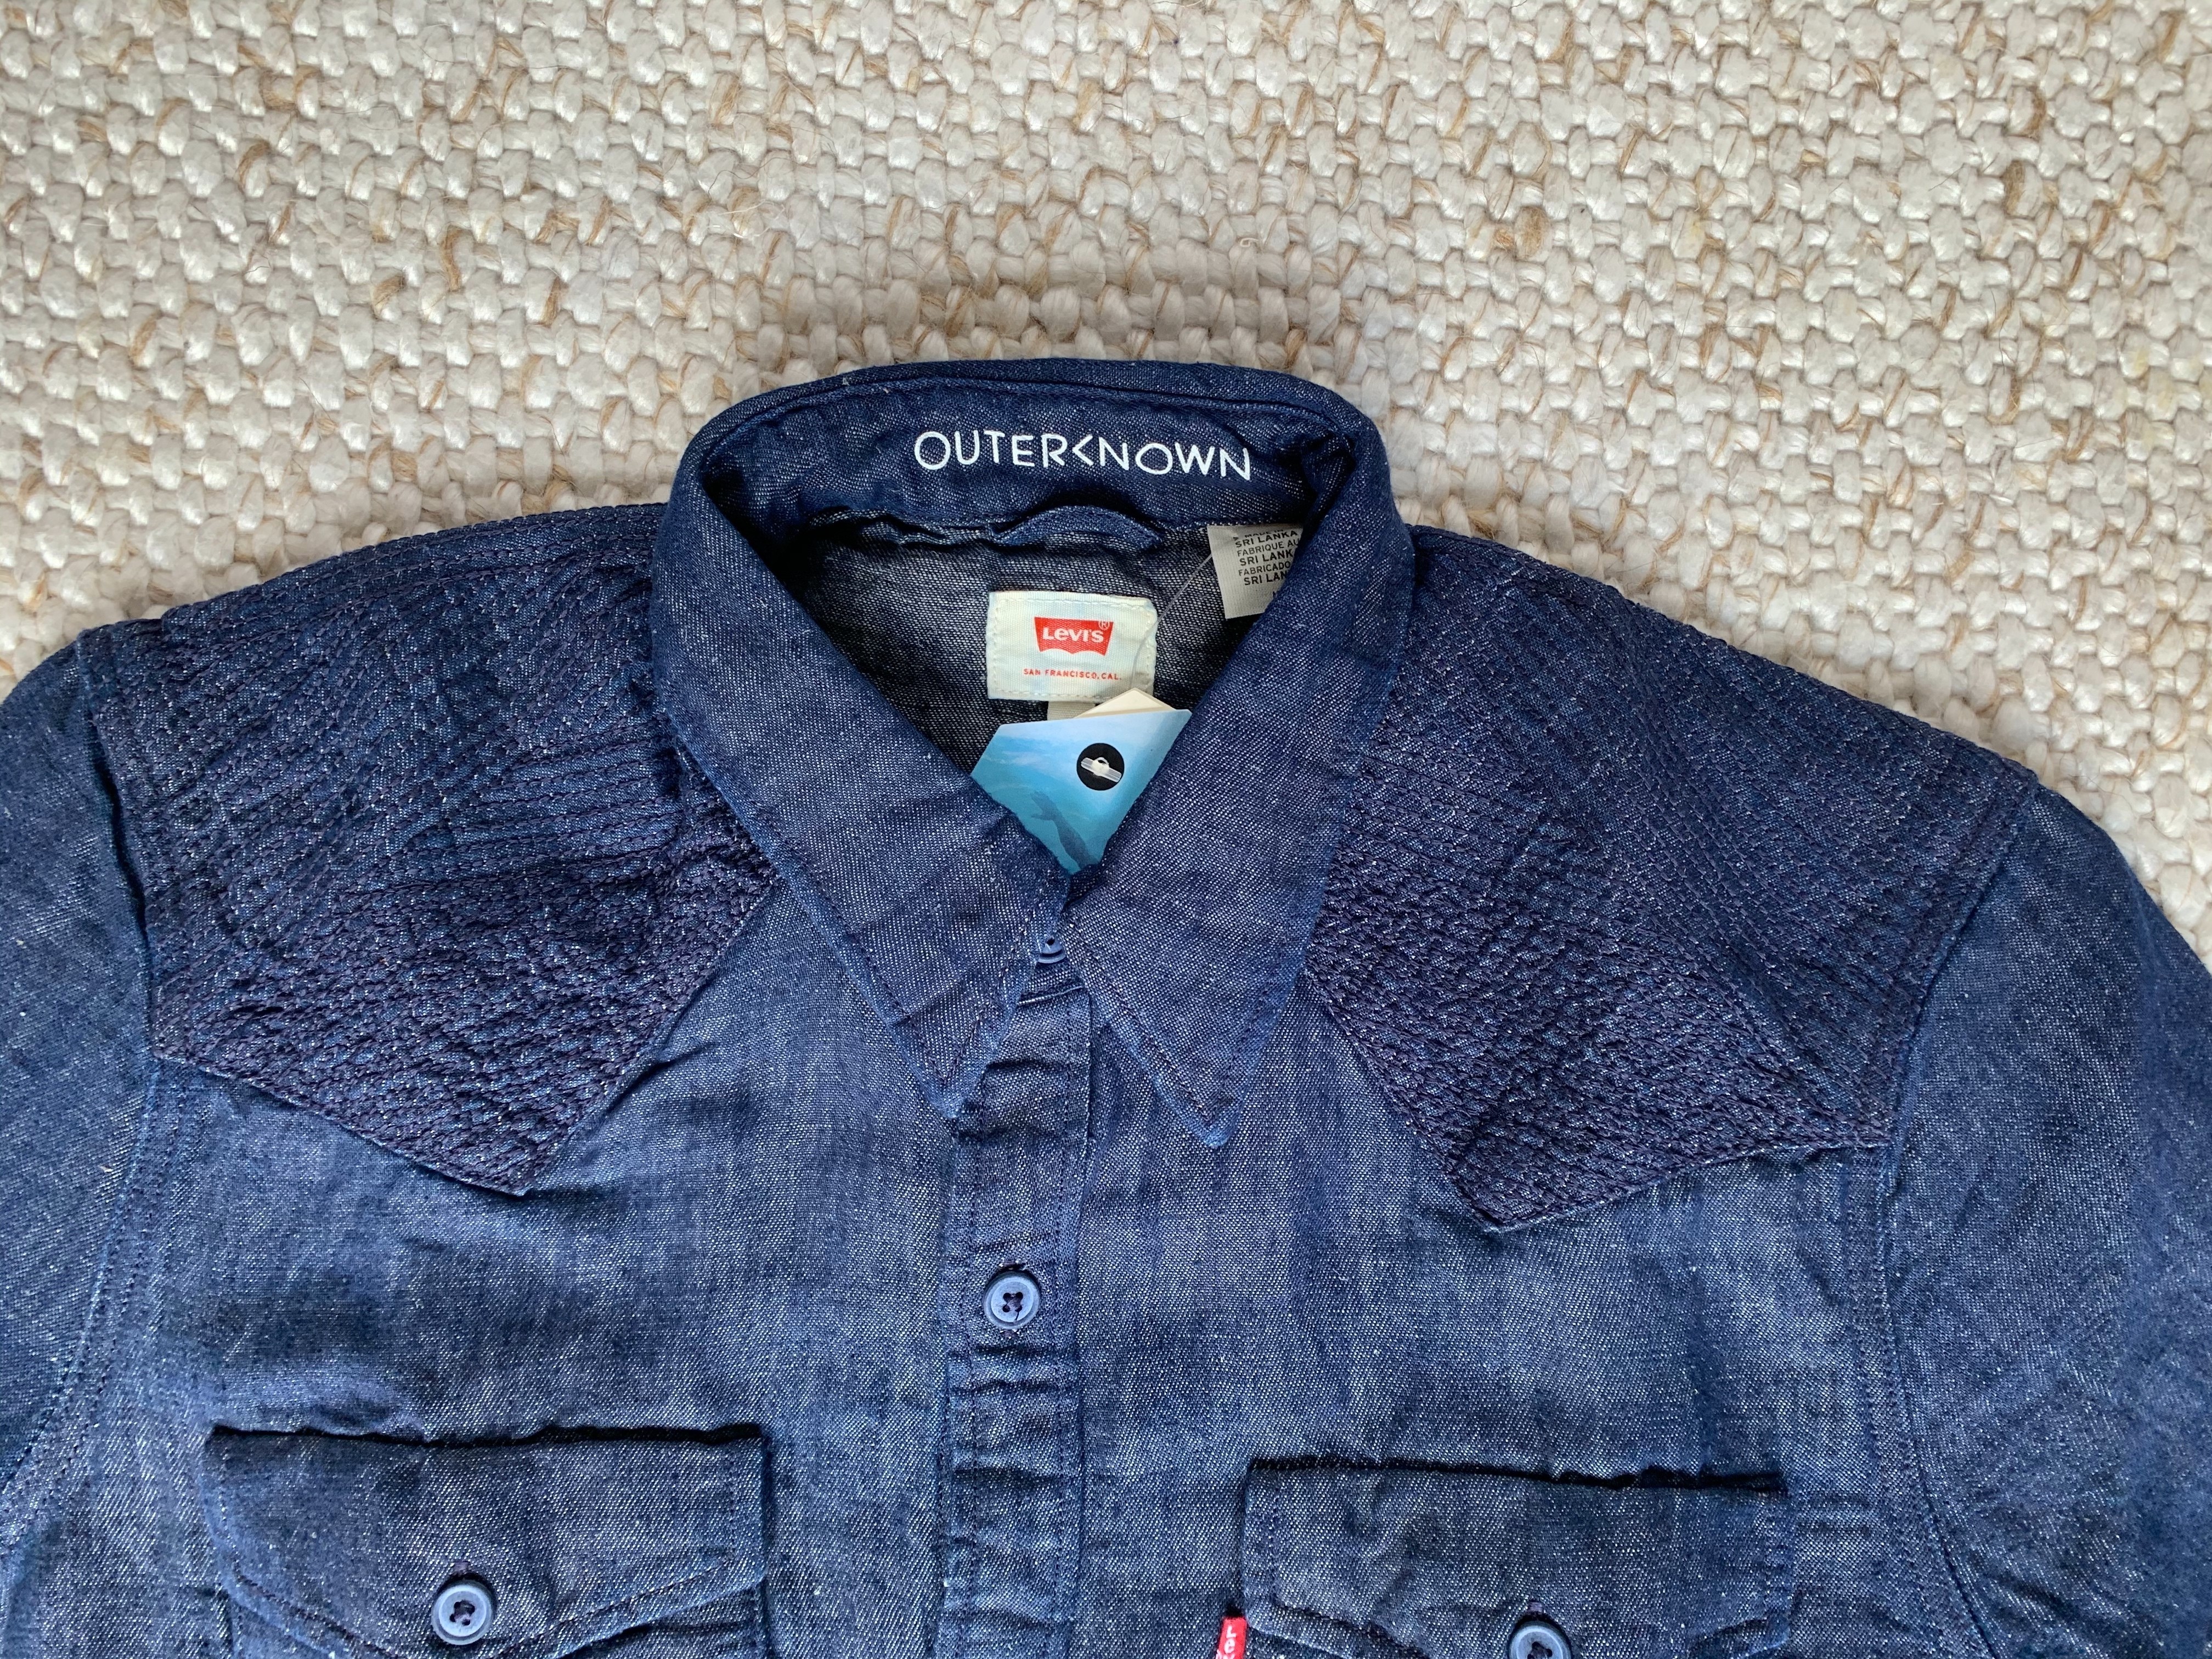 Outerknown - NWT $128 - Outerknown X Levi's Western w/ Stitched Yoke - 2